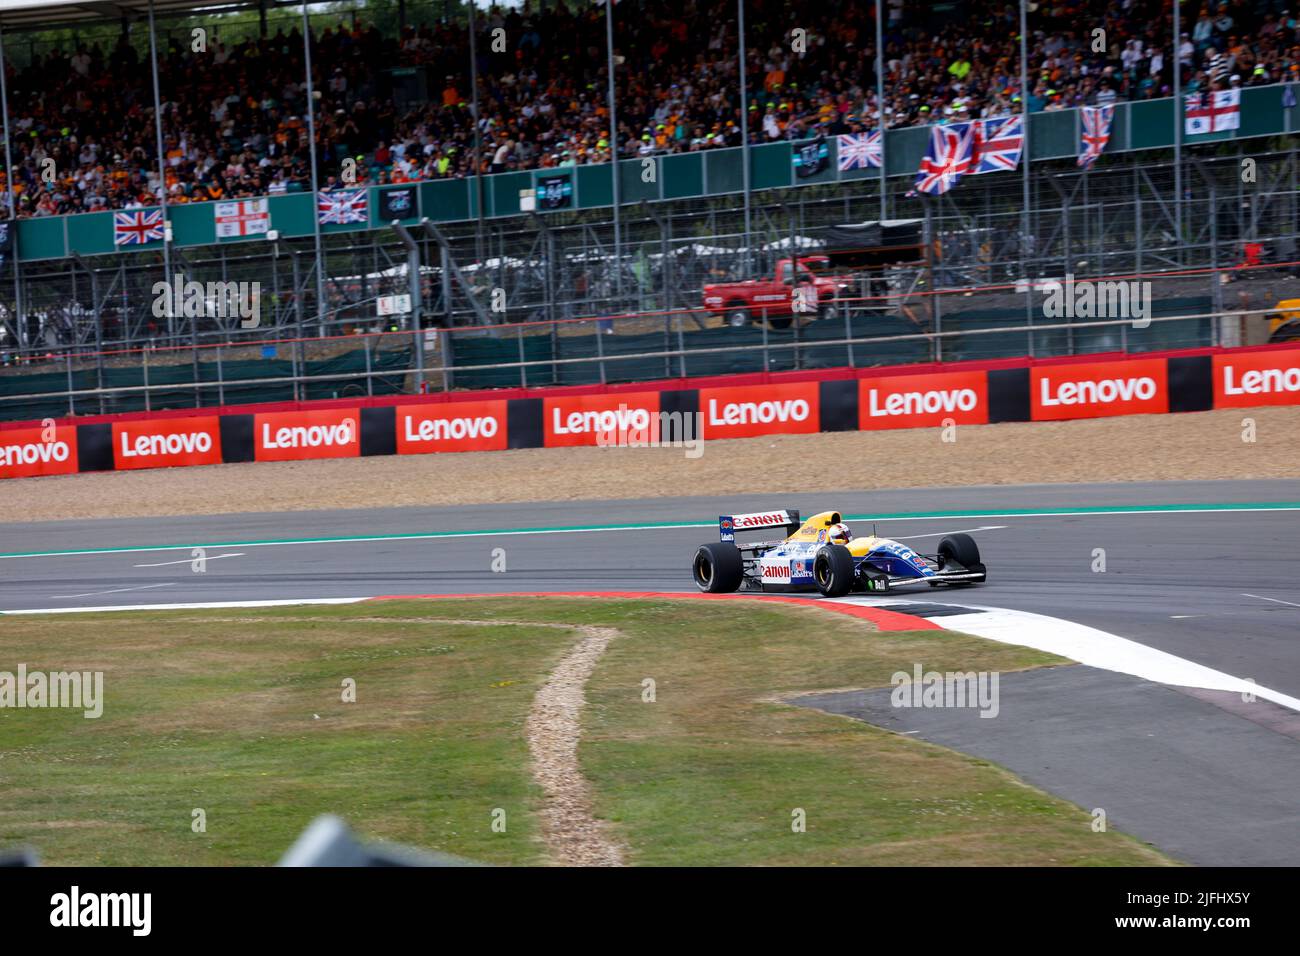 Silverstone, UK. 3rd July, 2022. #5 Sebastian Vettel (DEU, Aston Martin Aramco Cognizant F1 Team) drives the 1992 Williams FW14 of Nigel Mansell, F1 Grand Prix of Great Britain at Silverstone Circuit on July 3, 2022 in Silverstone, United Kingdom. (Photo by HIGH TWO) Credit: dpa/Alamy Live News Stock Photo